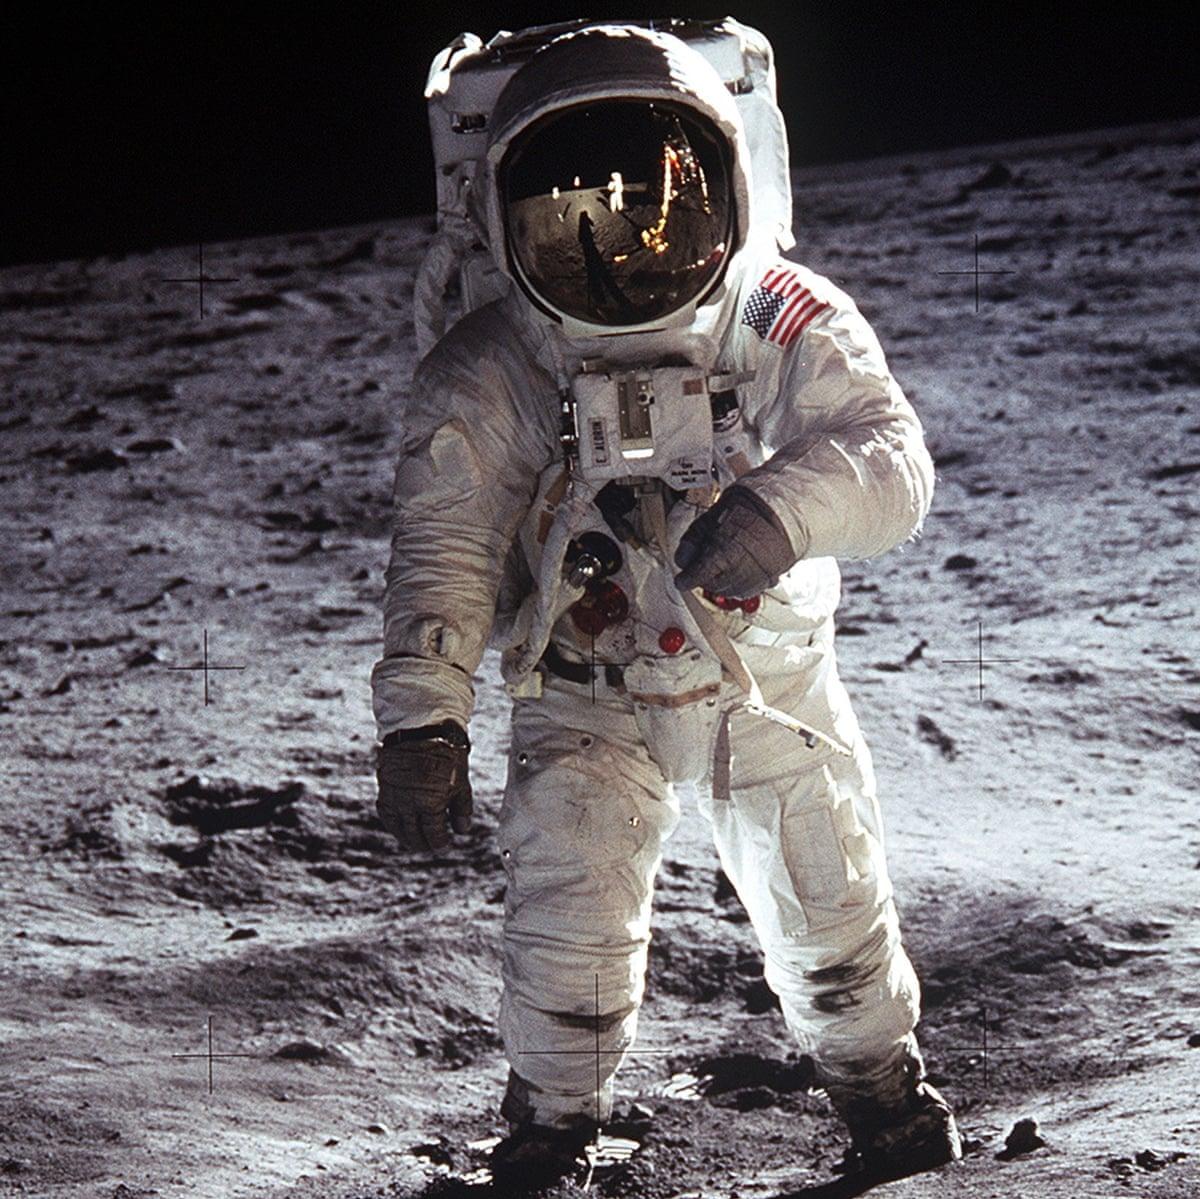 The greatest photos ever Why the moon landing shots are artistic